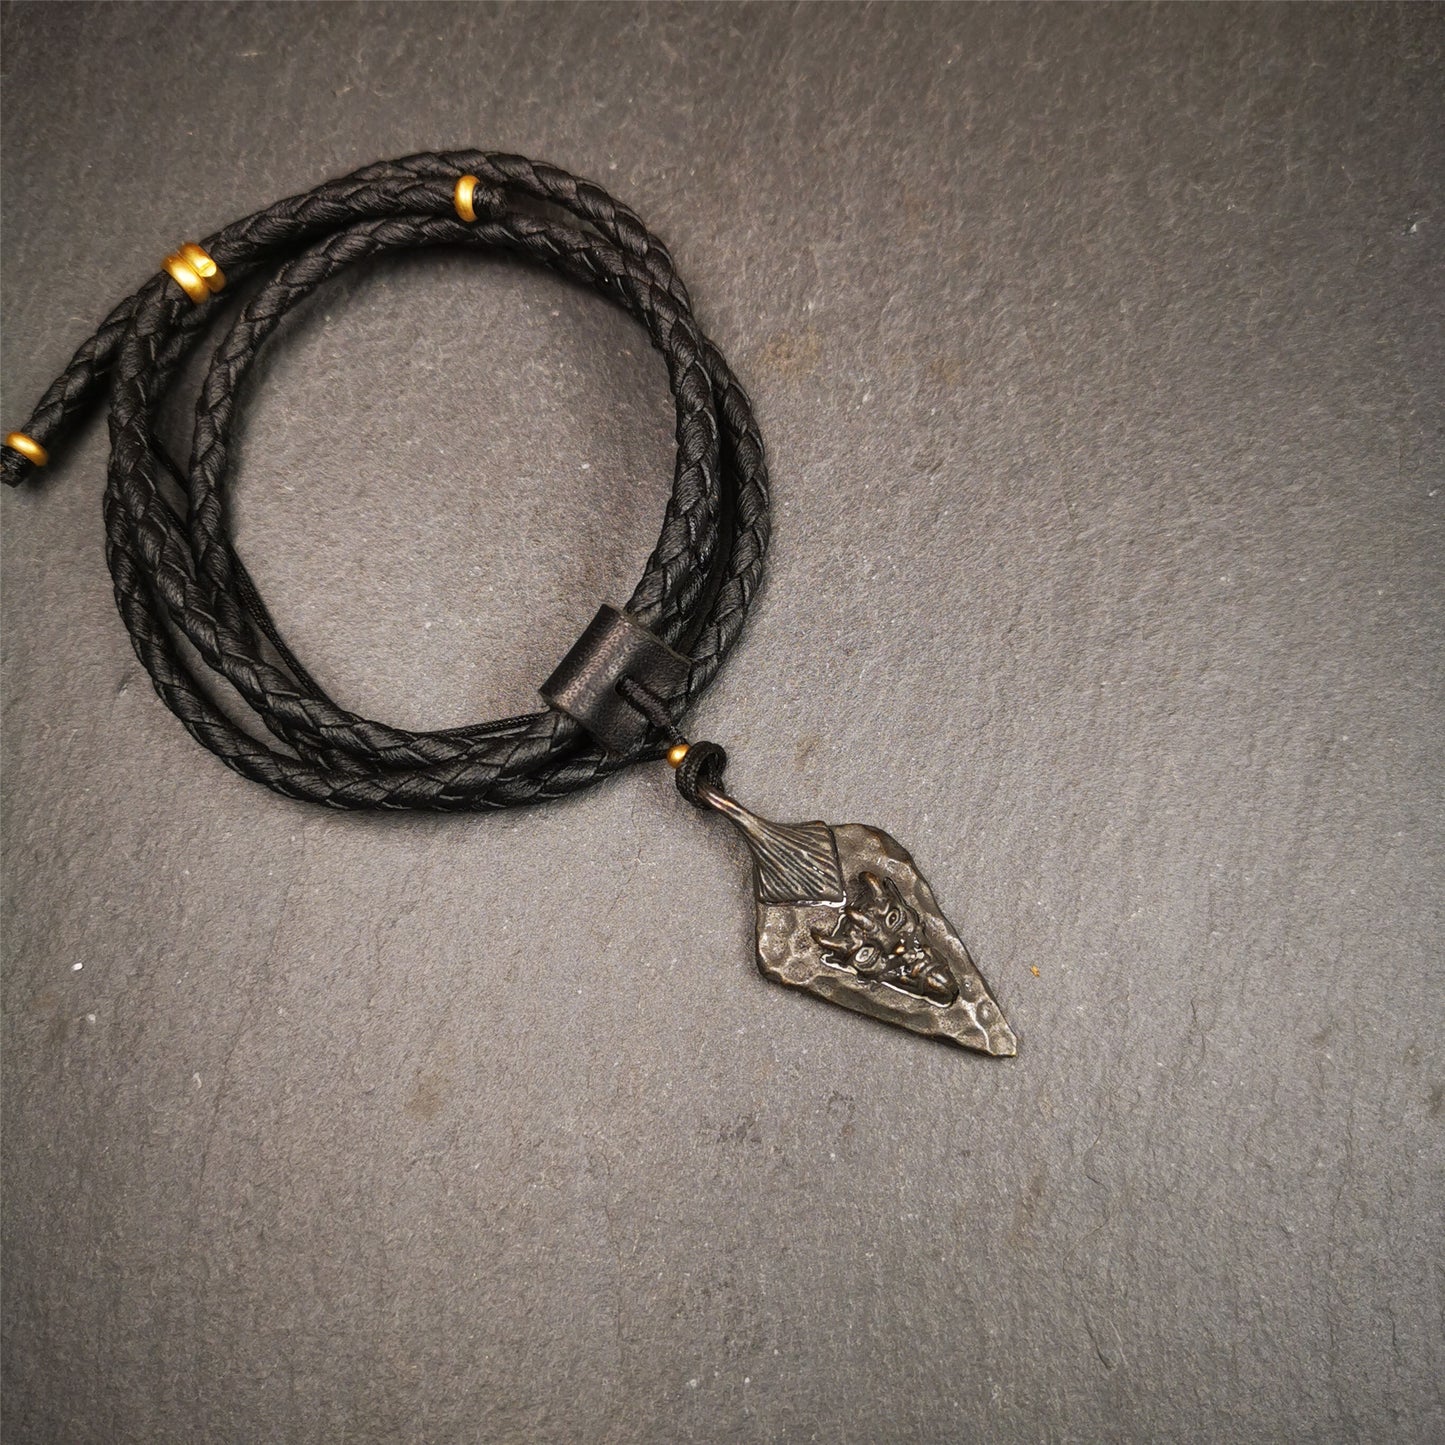 This demon pendant is made of copper, spearhead or leaf shape,dark color,size is 45mm × 20mm,You can make it a necklace, pendant, keychain,or just as an ornament.